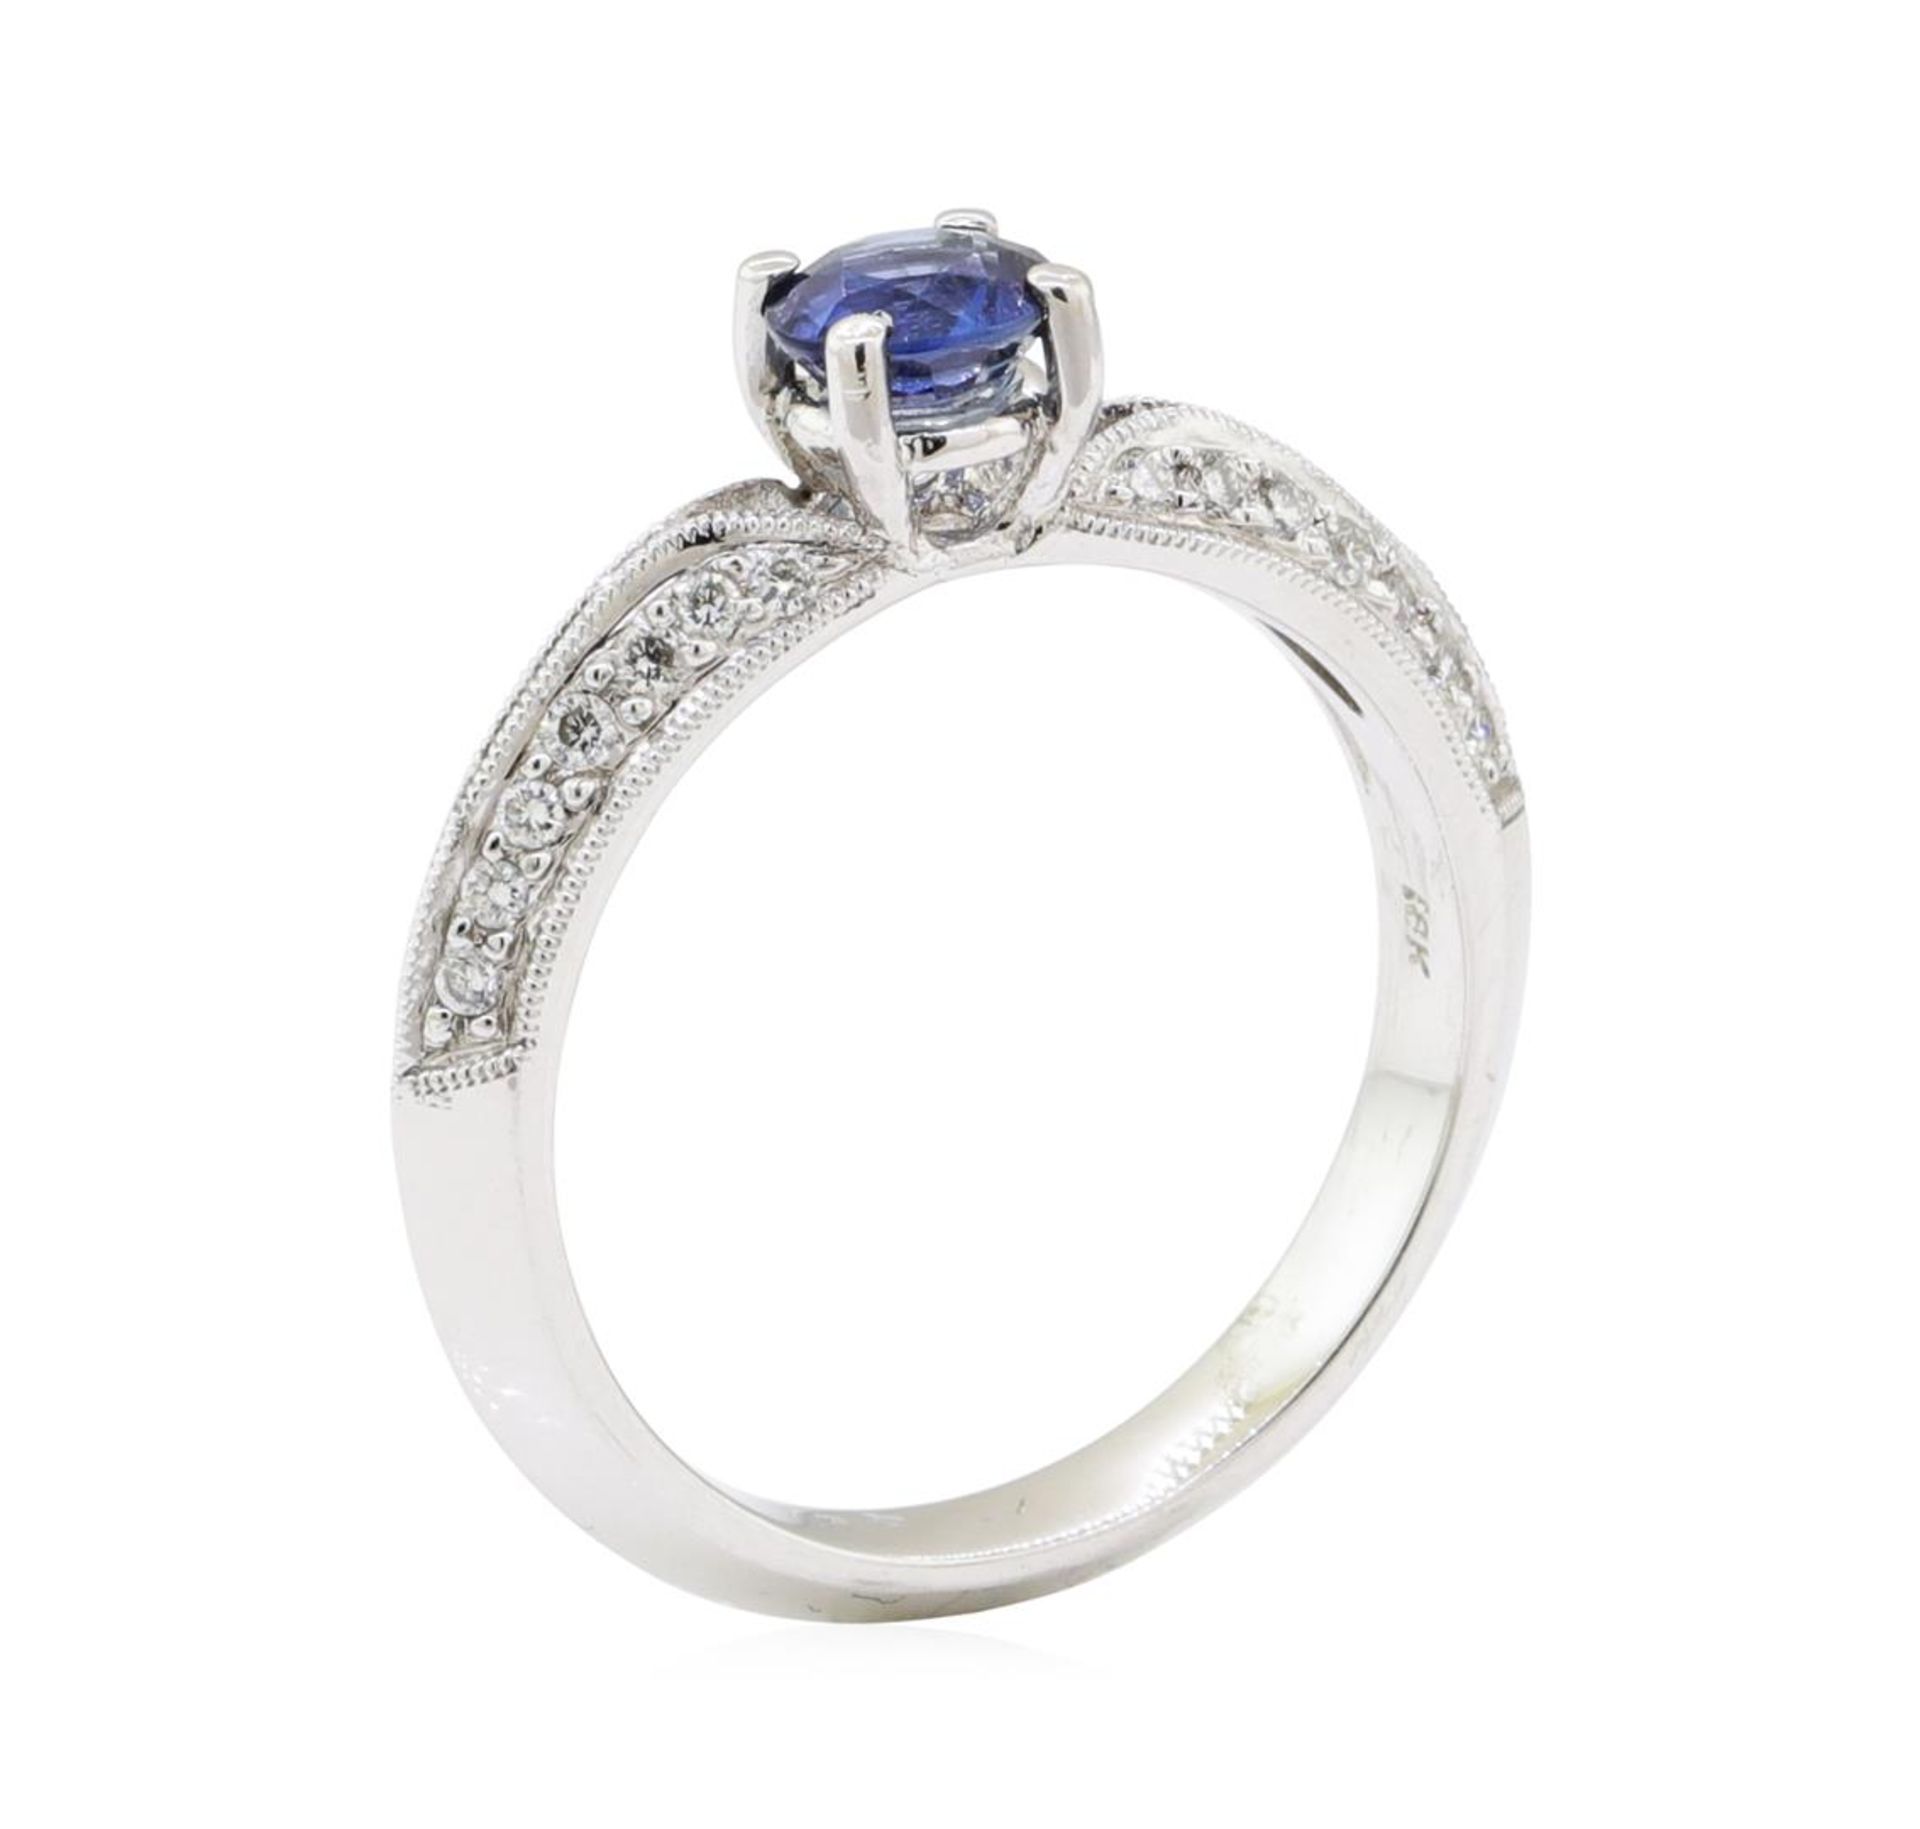 0.75 ctw Sapphire and Diamond Ring - 18KT White Gold - Image 4 of 4